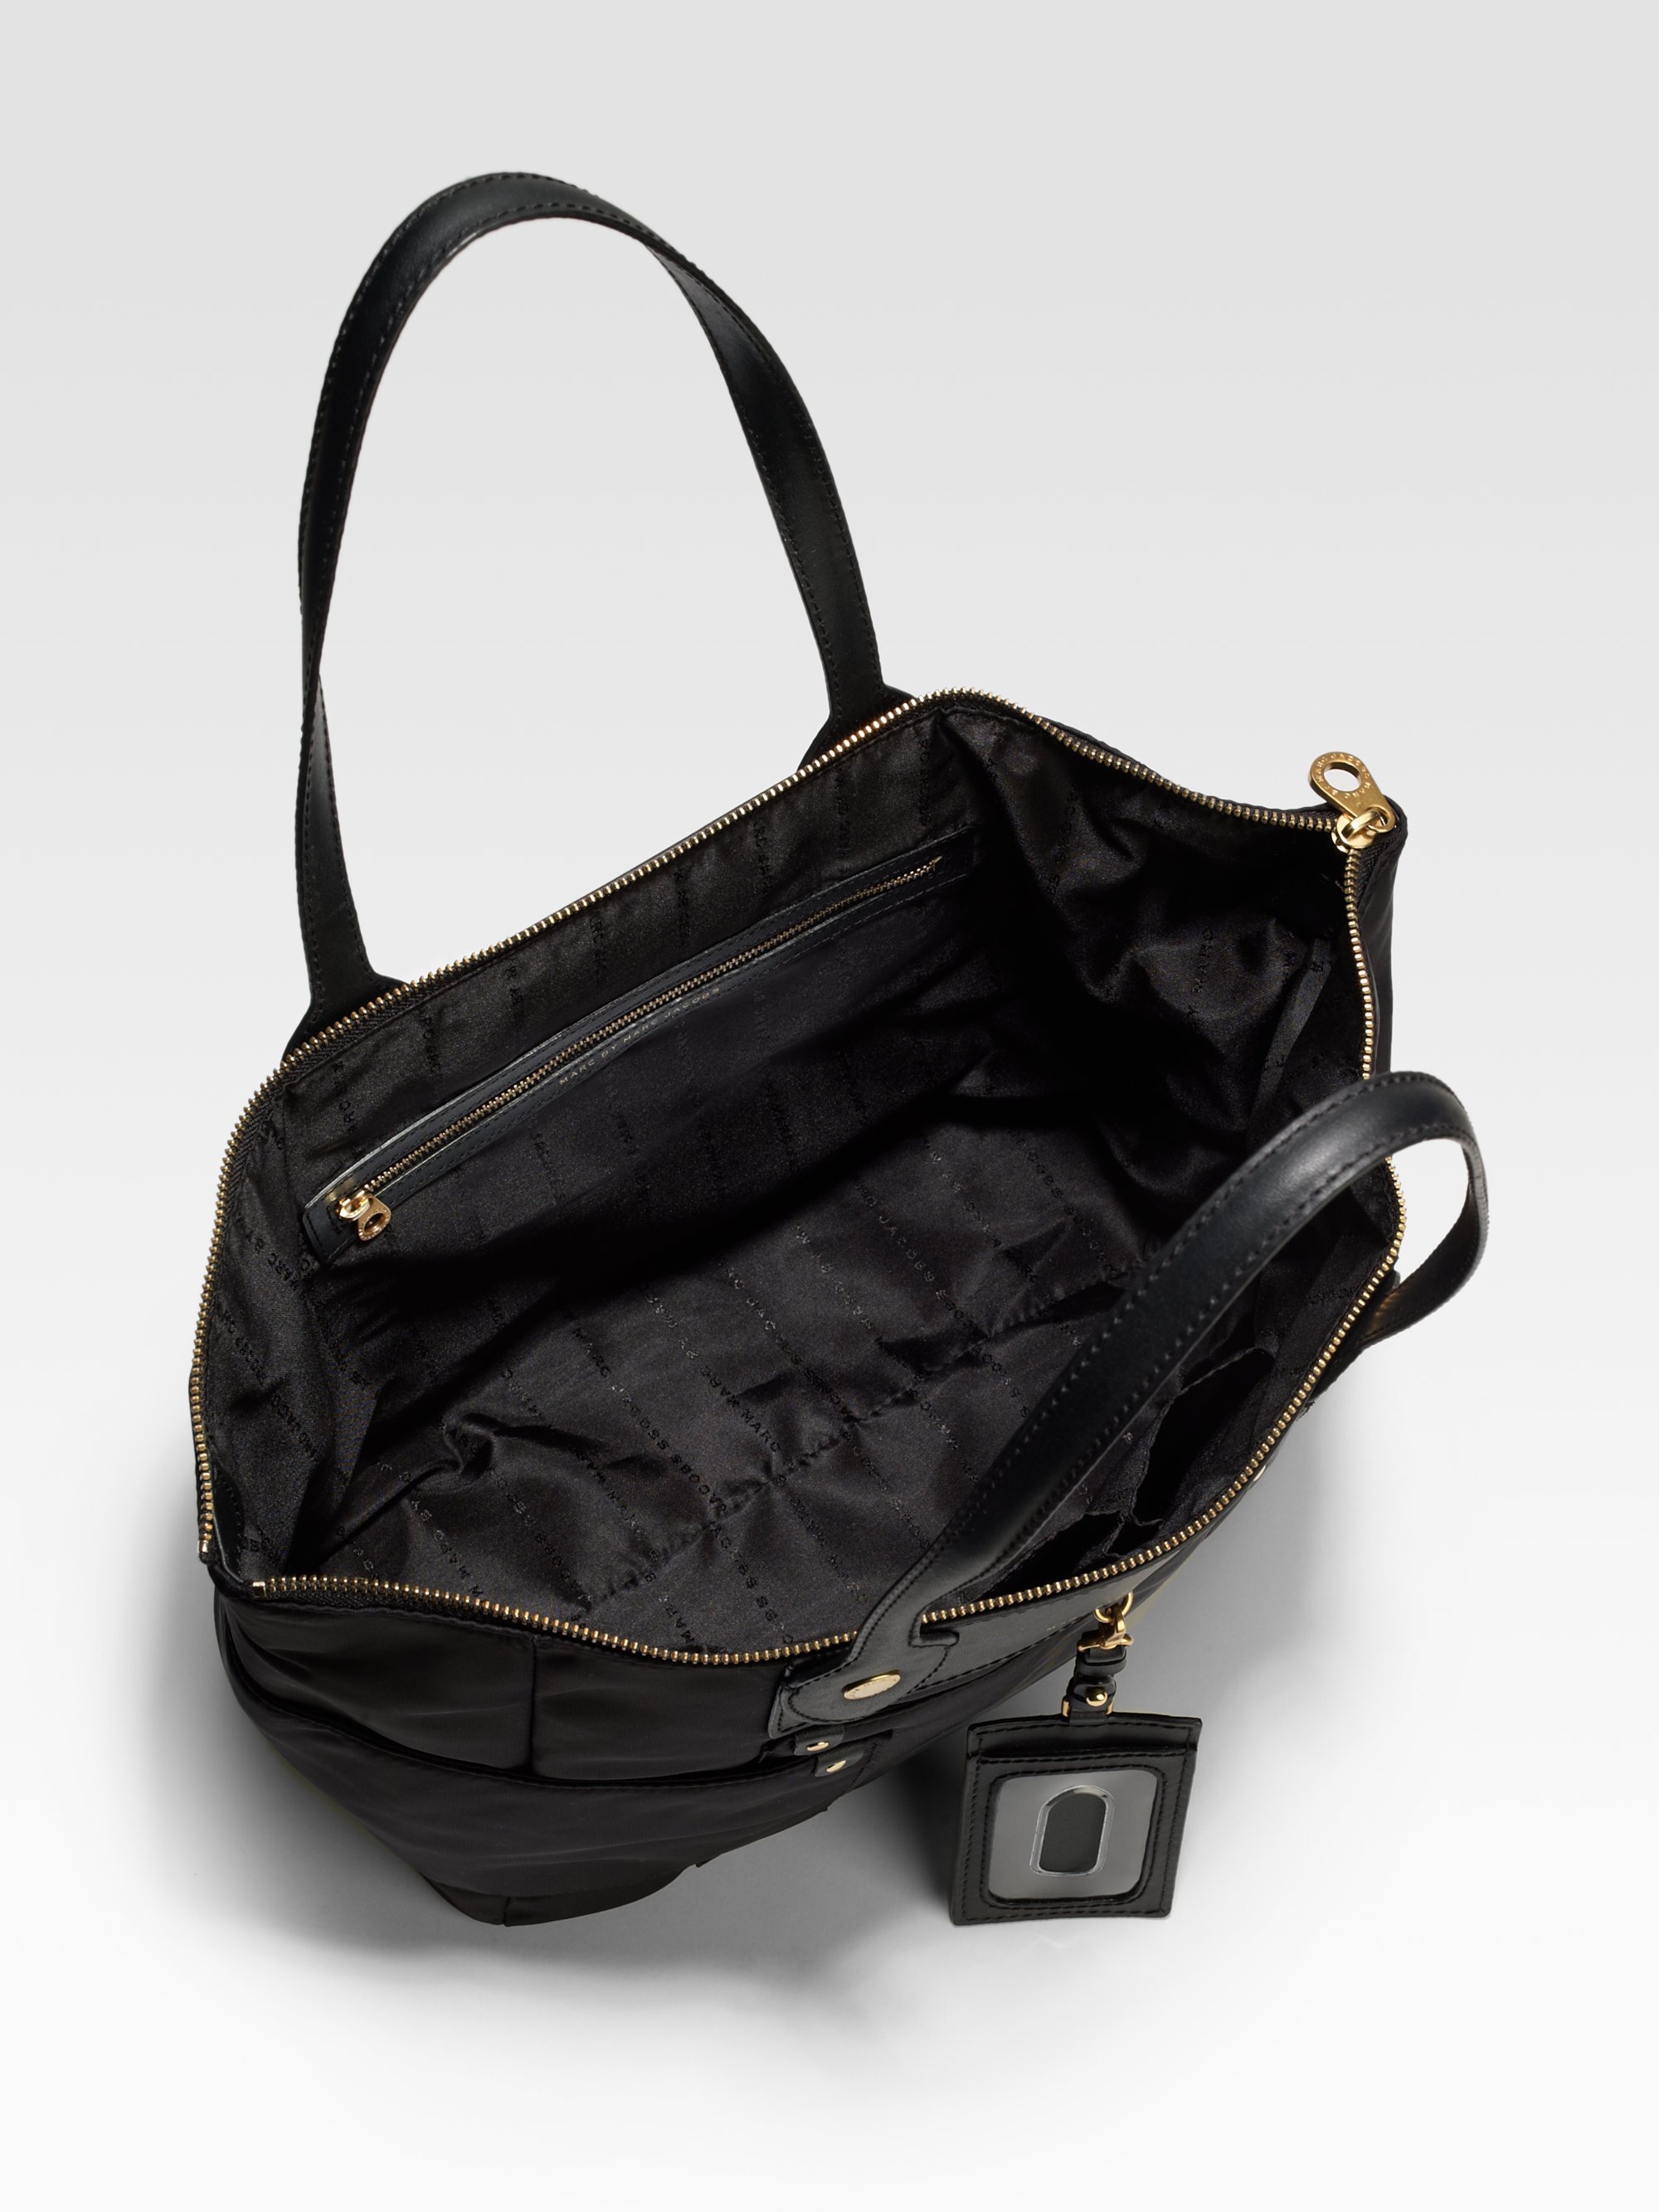 Marc By Marc Jacobs Nylon Leather Tote Bag in Black | Lyst